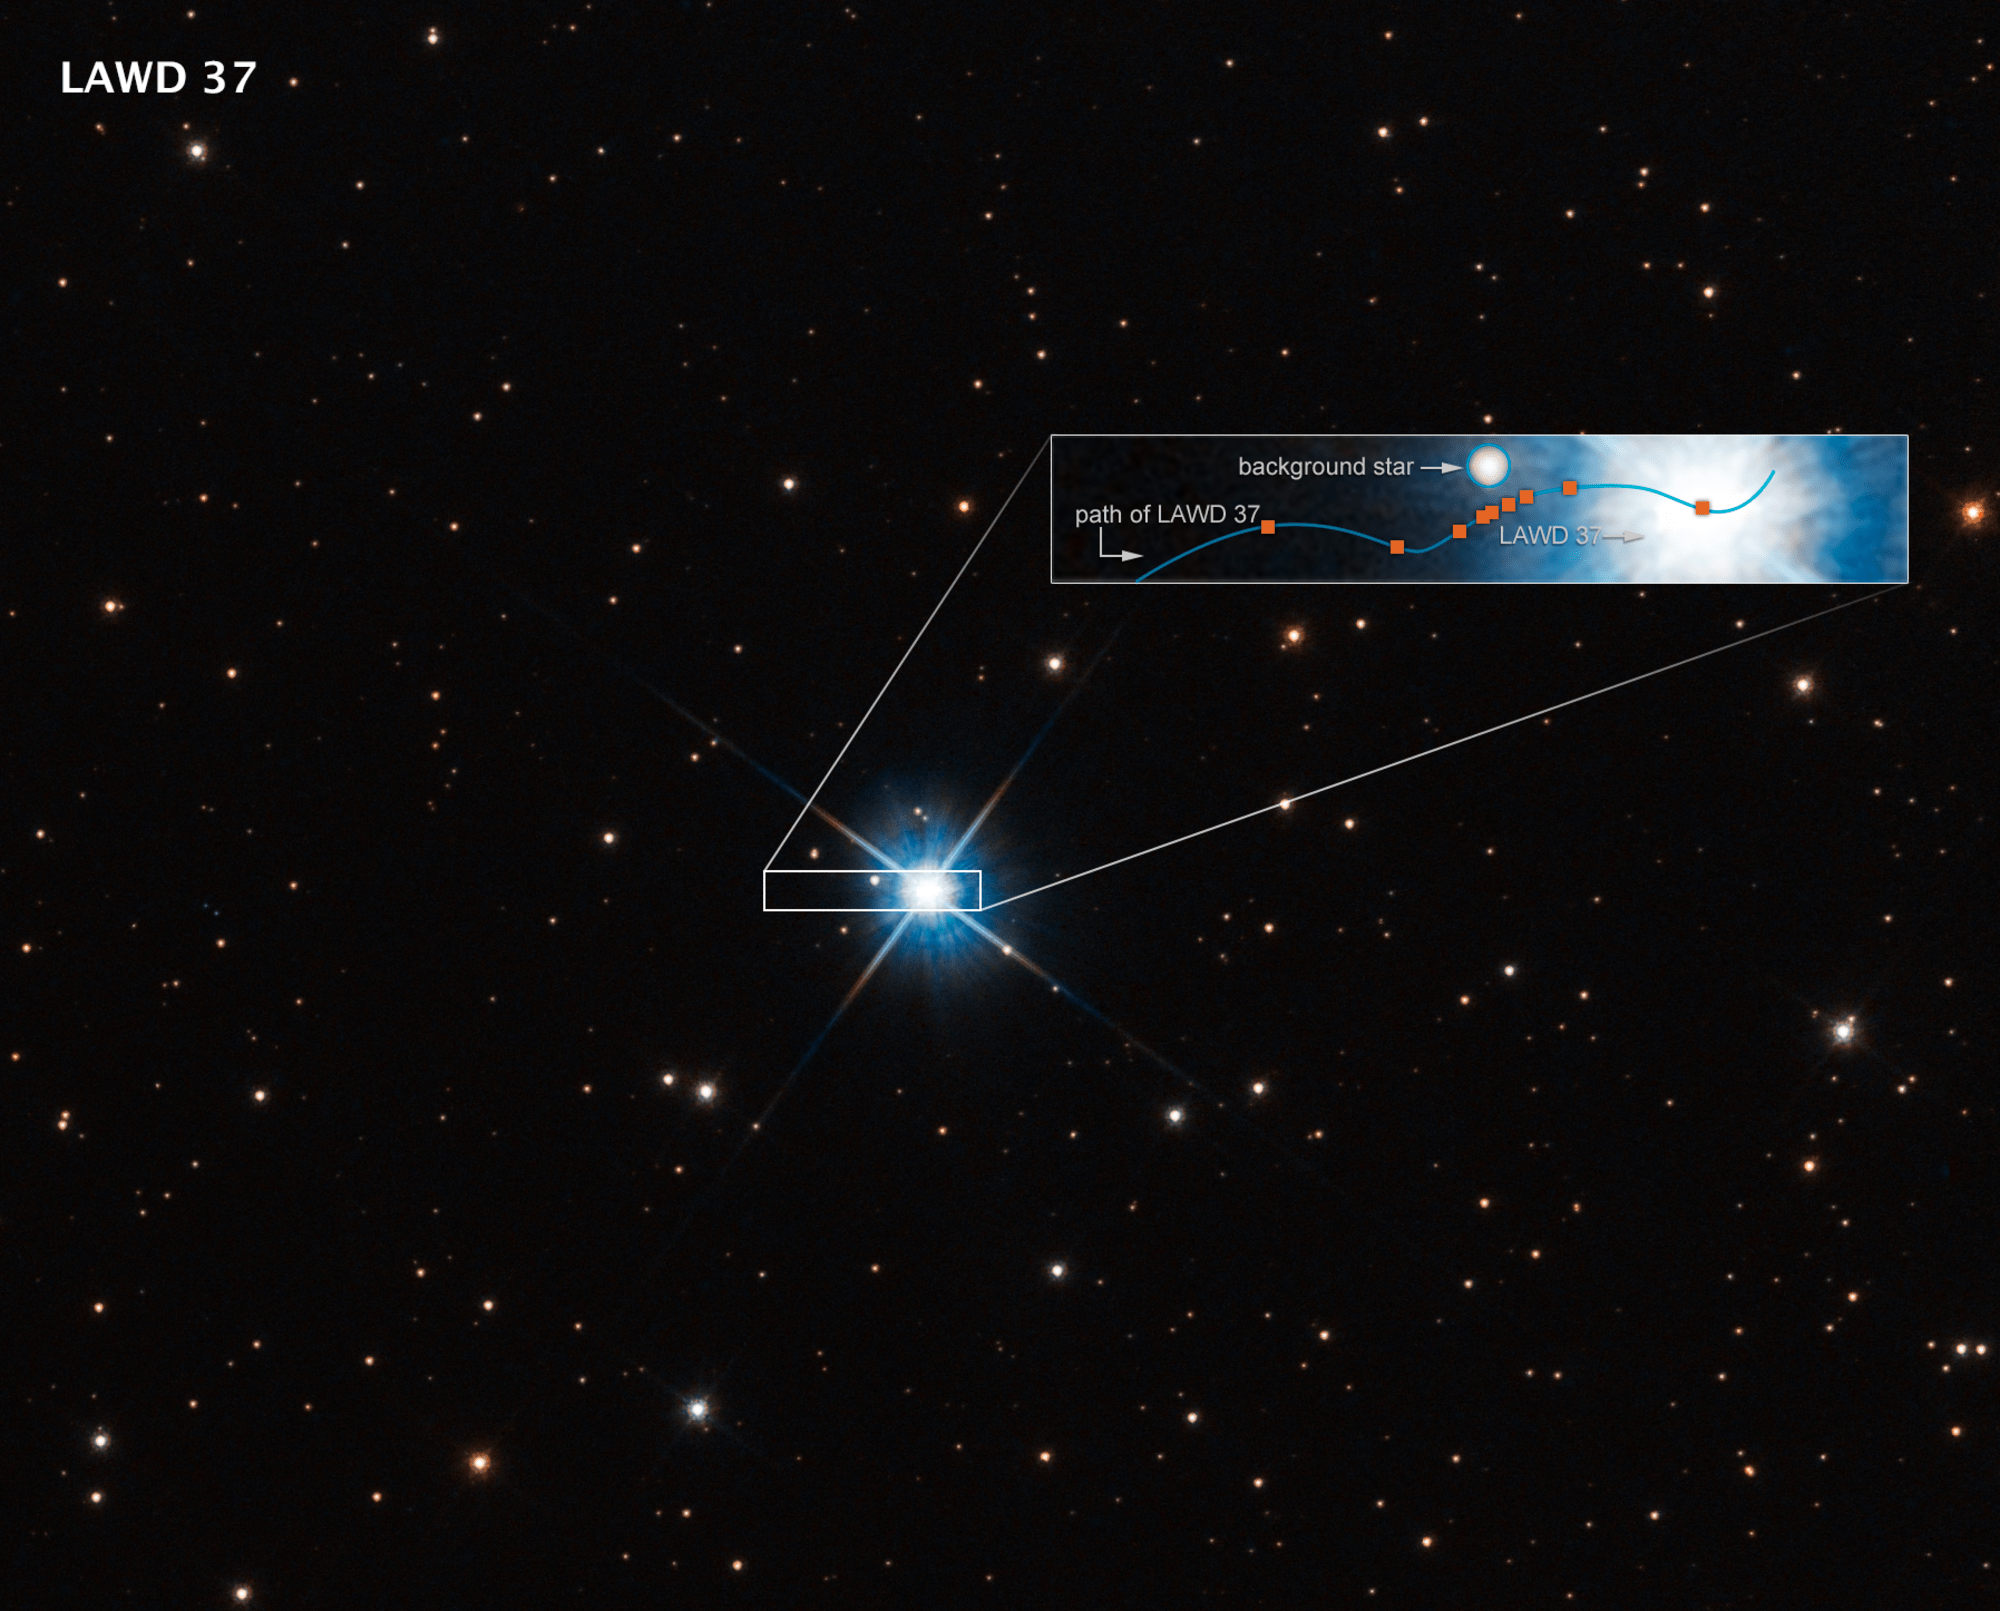 Black background with stars. Image center: blue-white star (LAWD 37) surrounded by horizontal rectangle that indicates the area highlighted in an inset box. Inset box illustrates the path of LAWD 37 and the position of the background star relative to it.